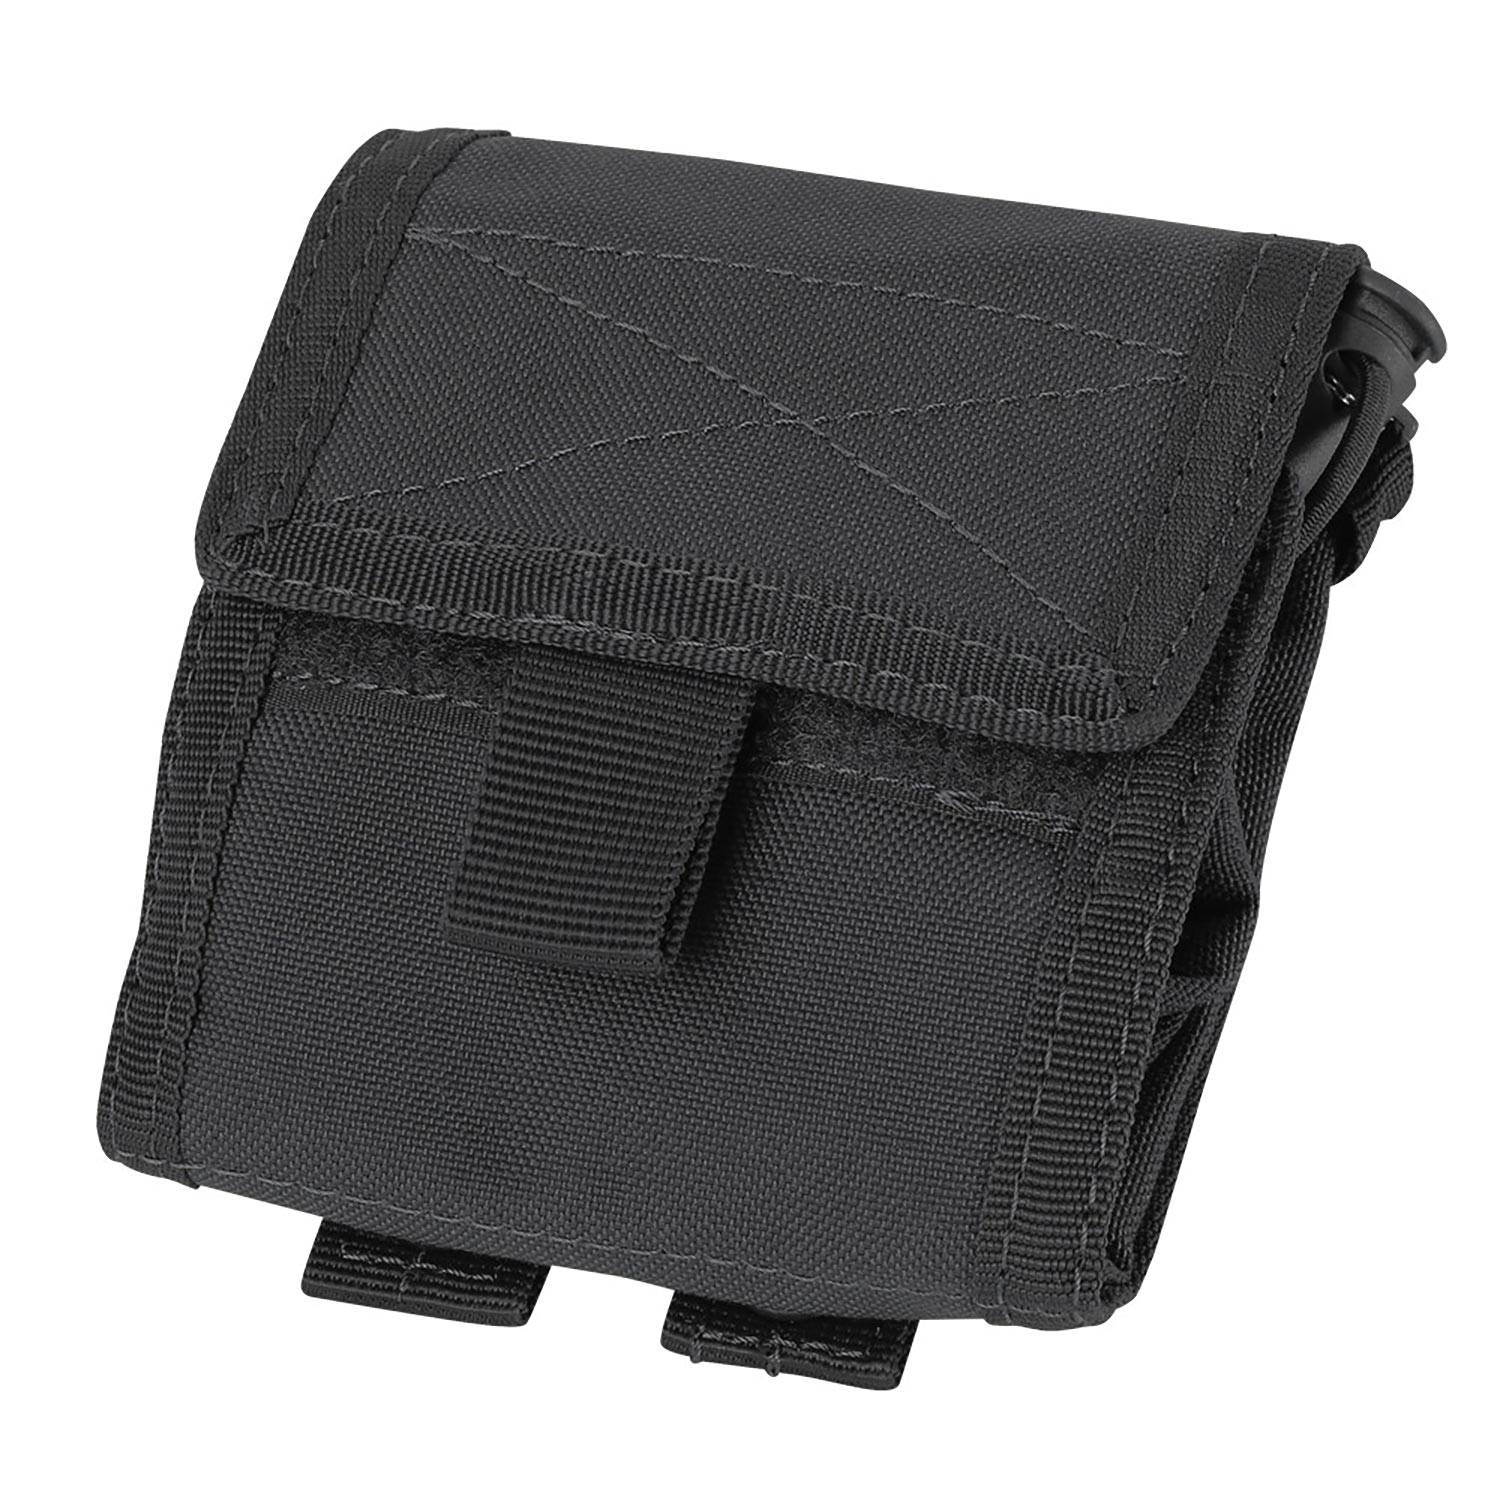 CONDOR ROLL-UP UTILITY POUCH